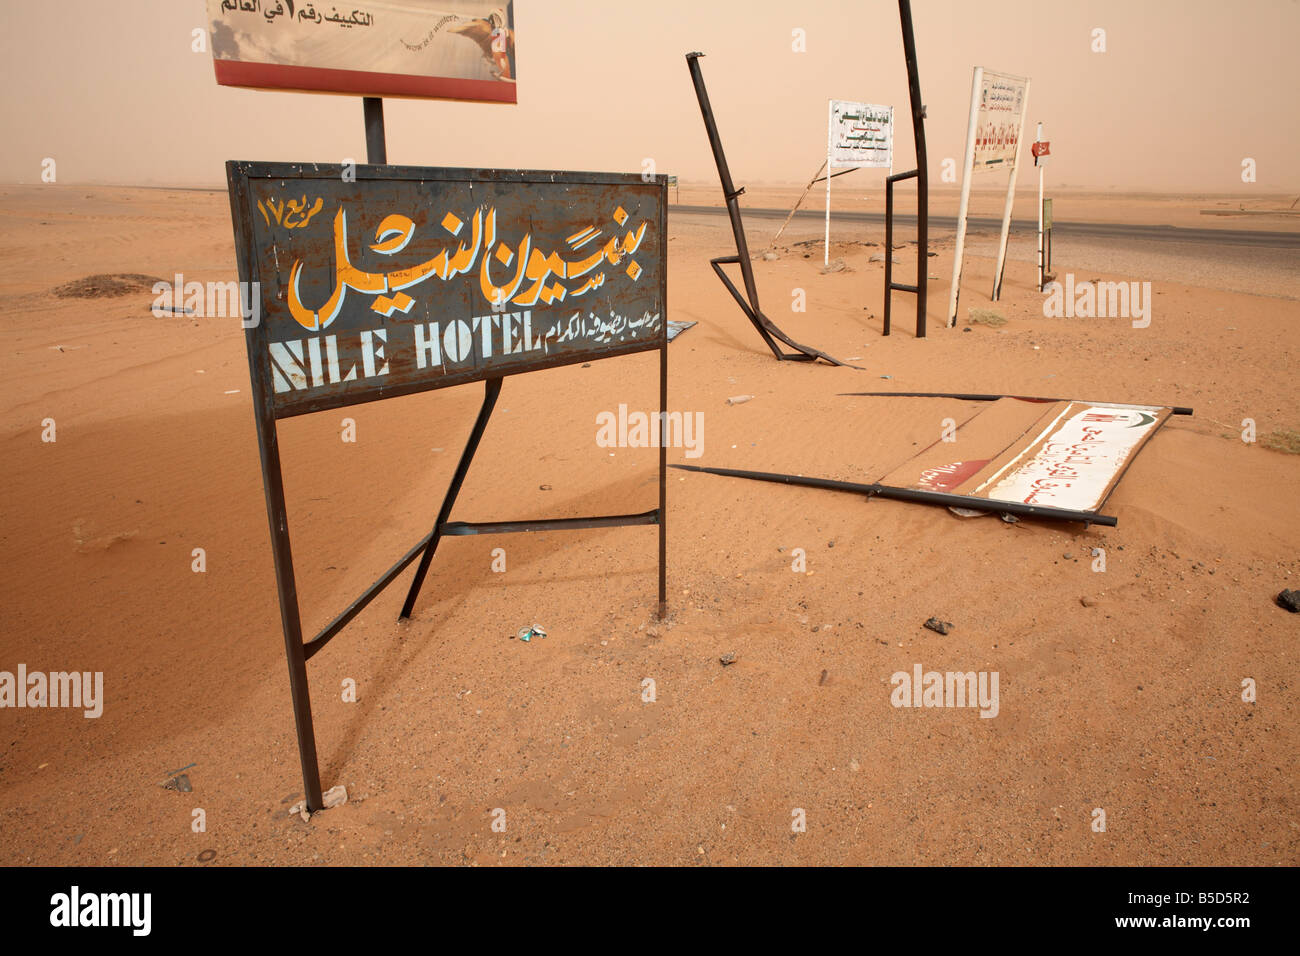 Signposts stand in the desert along the Khartoum to Atbara highway, Sudan, Africa Stock Photo